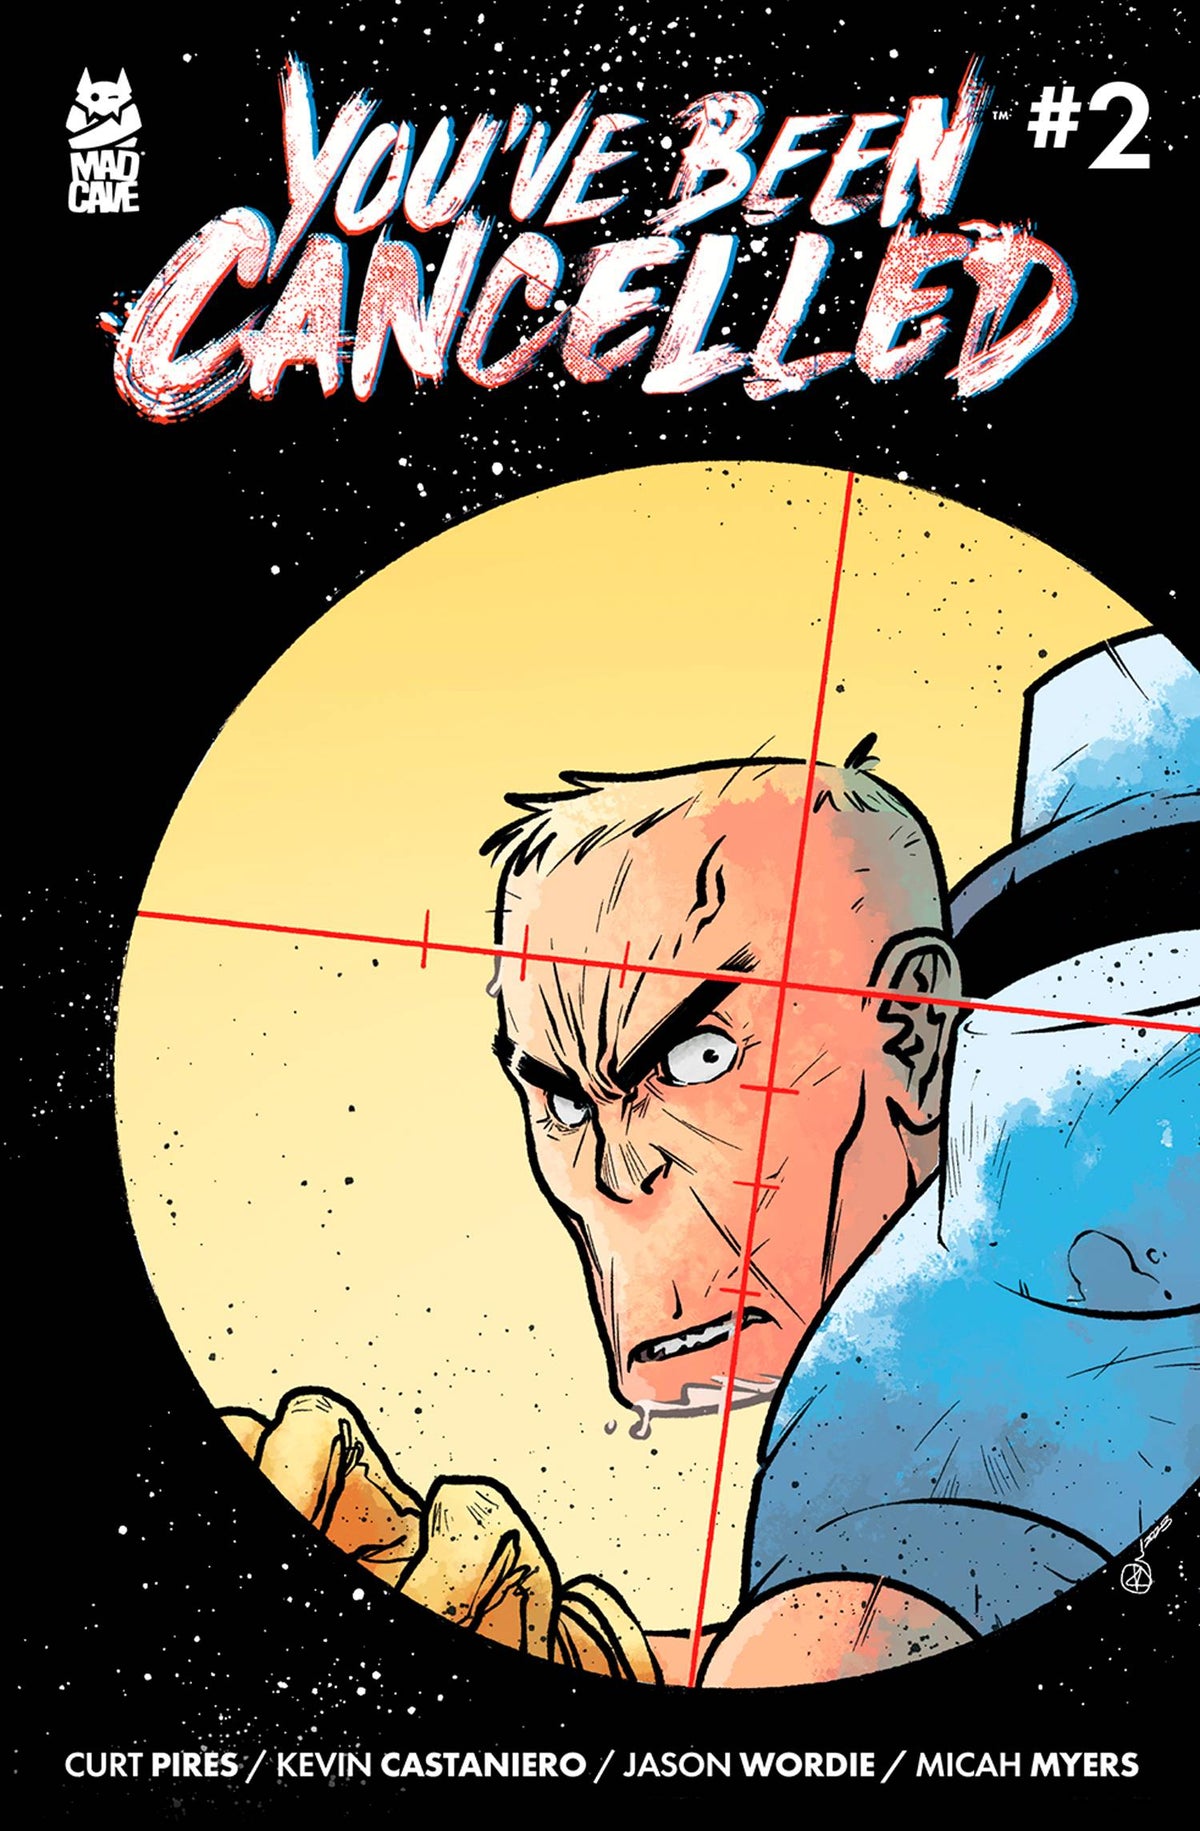 YOUVE BEEN CANCELLED #2 (OF 4) CVR A CASTANIERO (MR)